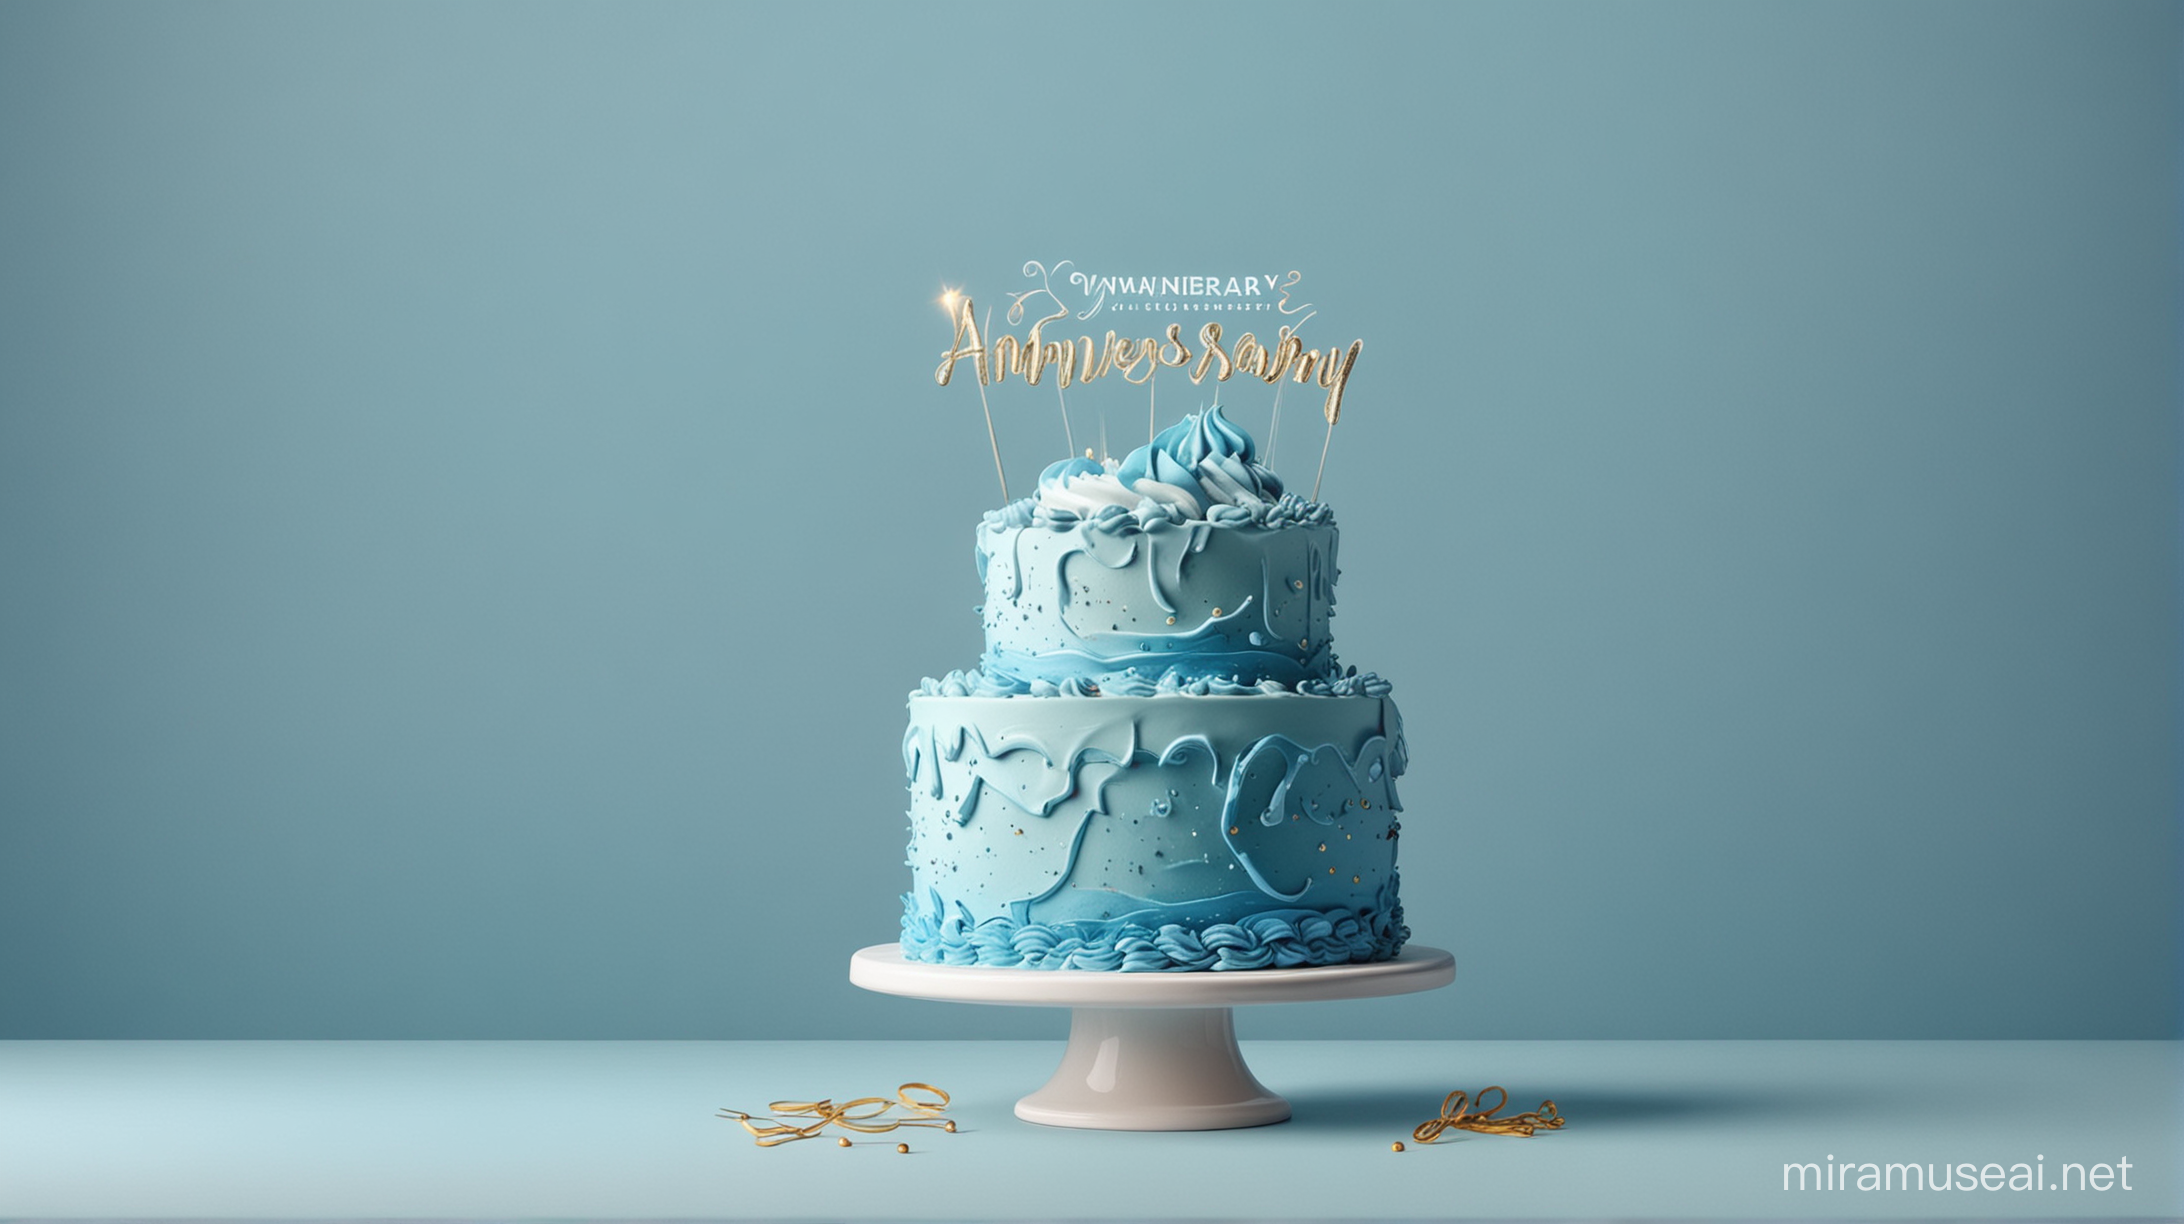 Anniversary cake banner for advertising in celebrating concept with blue color,  without using text or number.